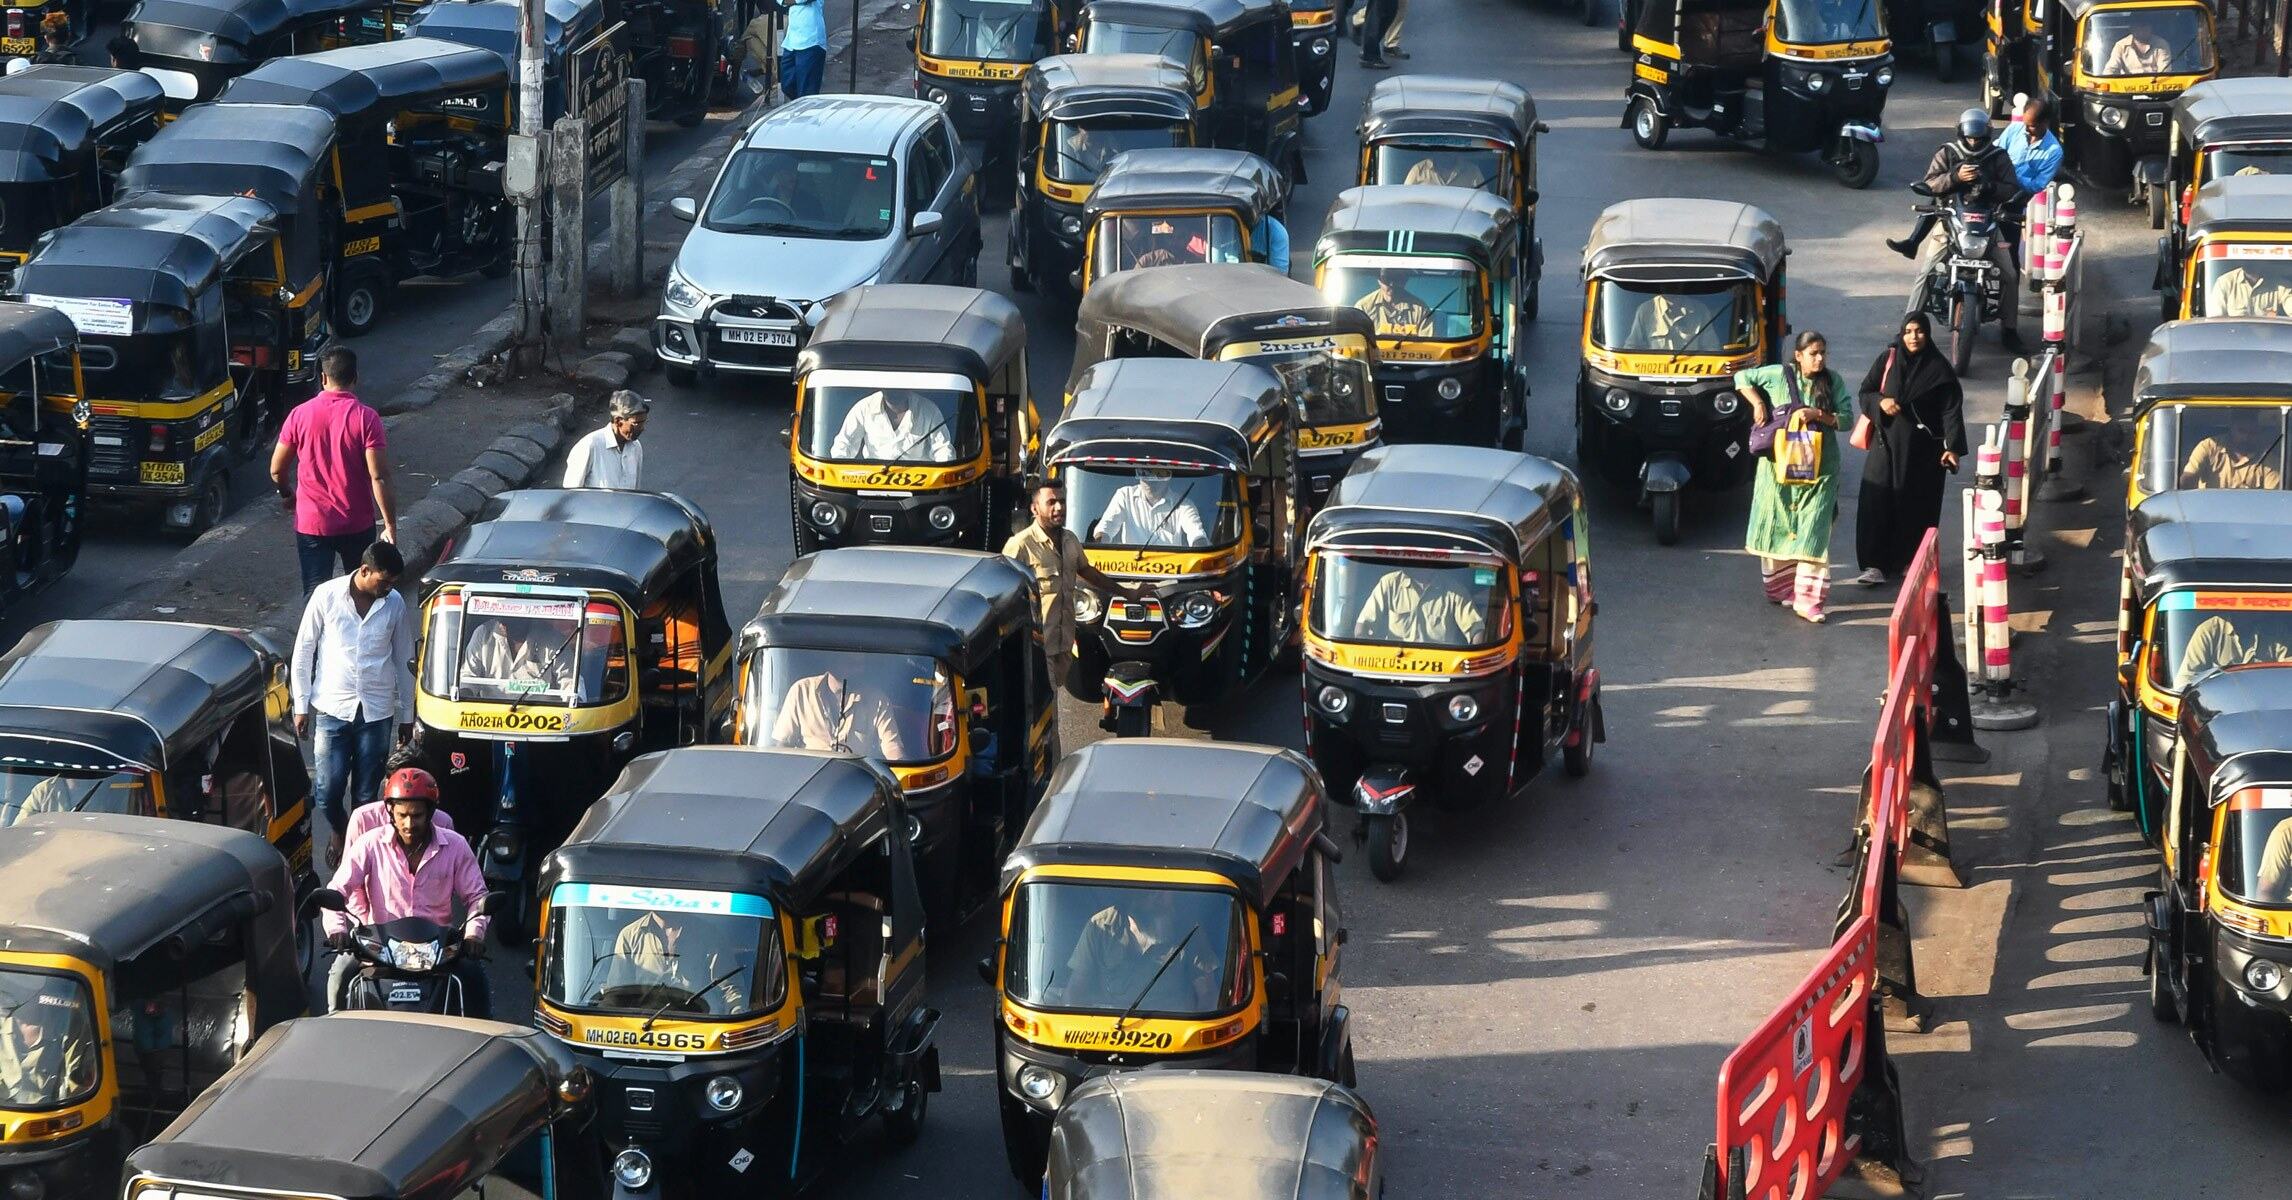 India Goes Electric With Battery-Swapping Rickshaws